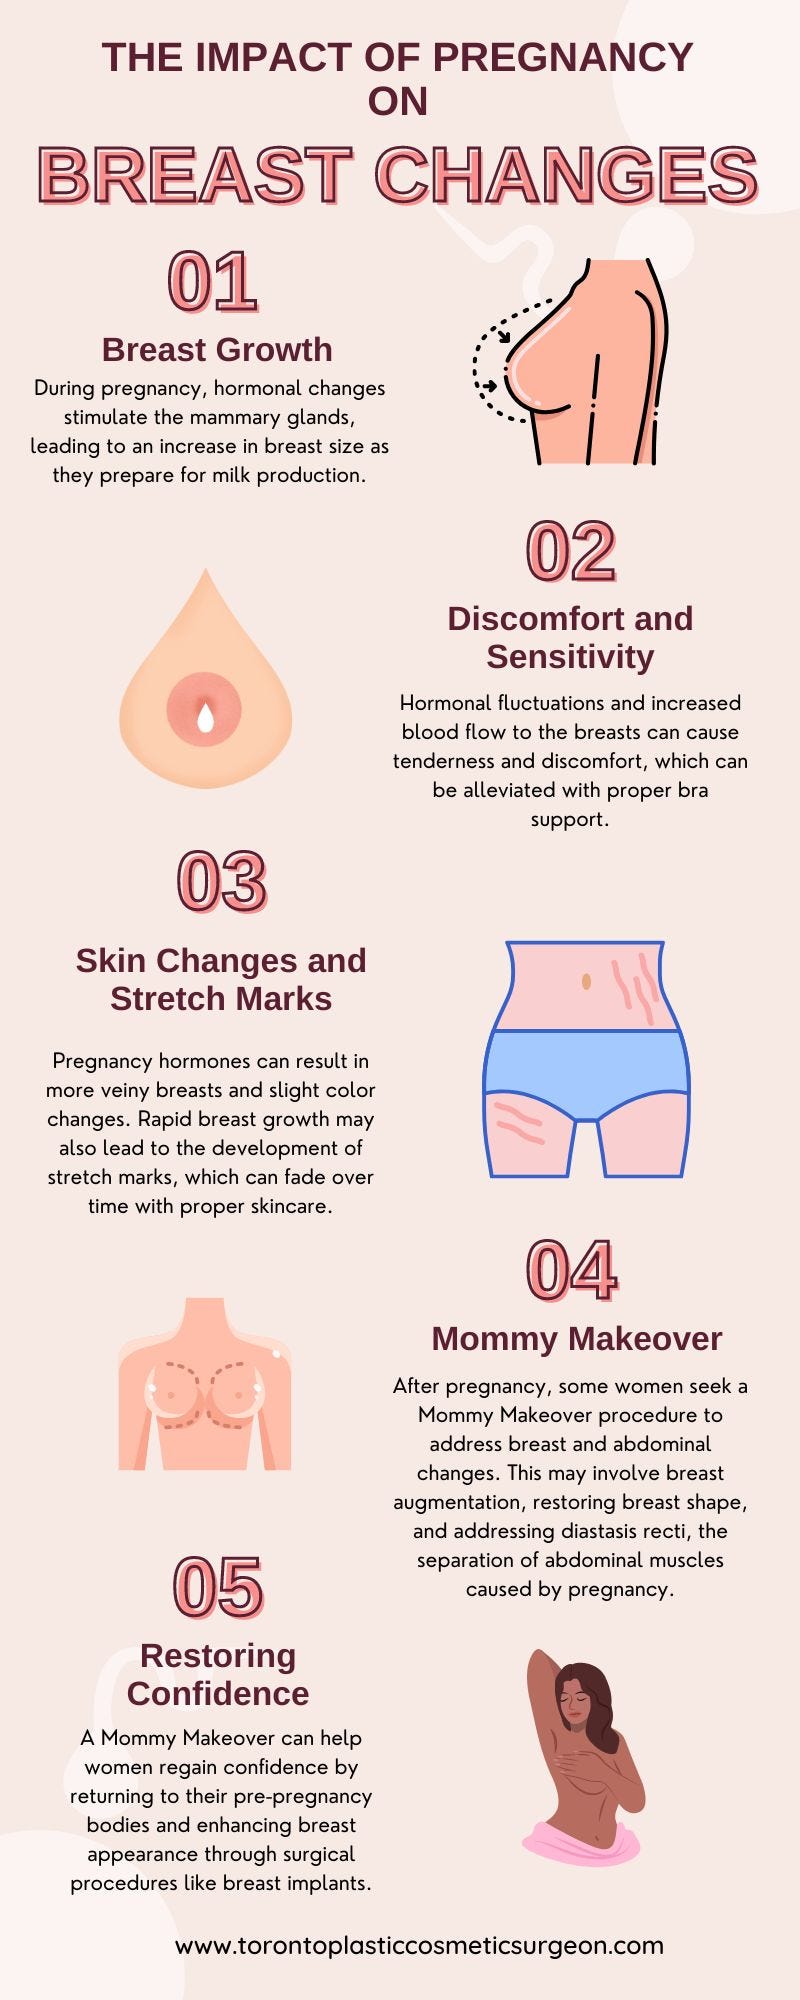 What Happens to Breasts During Pregnancy?